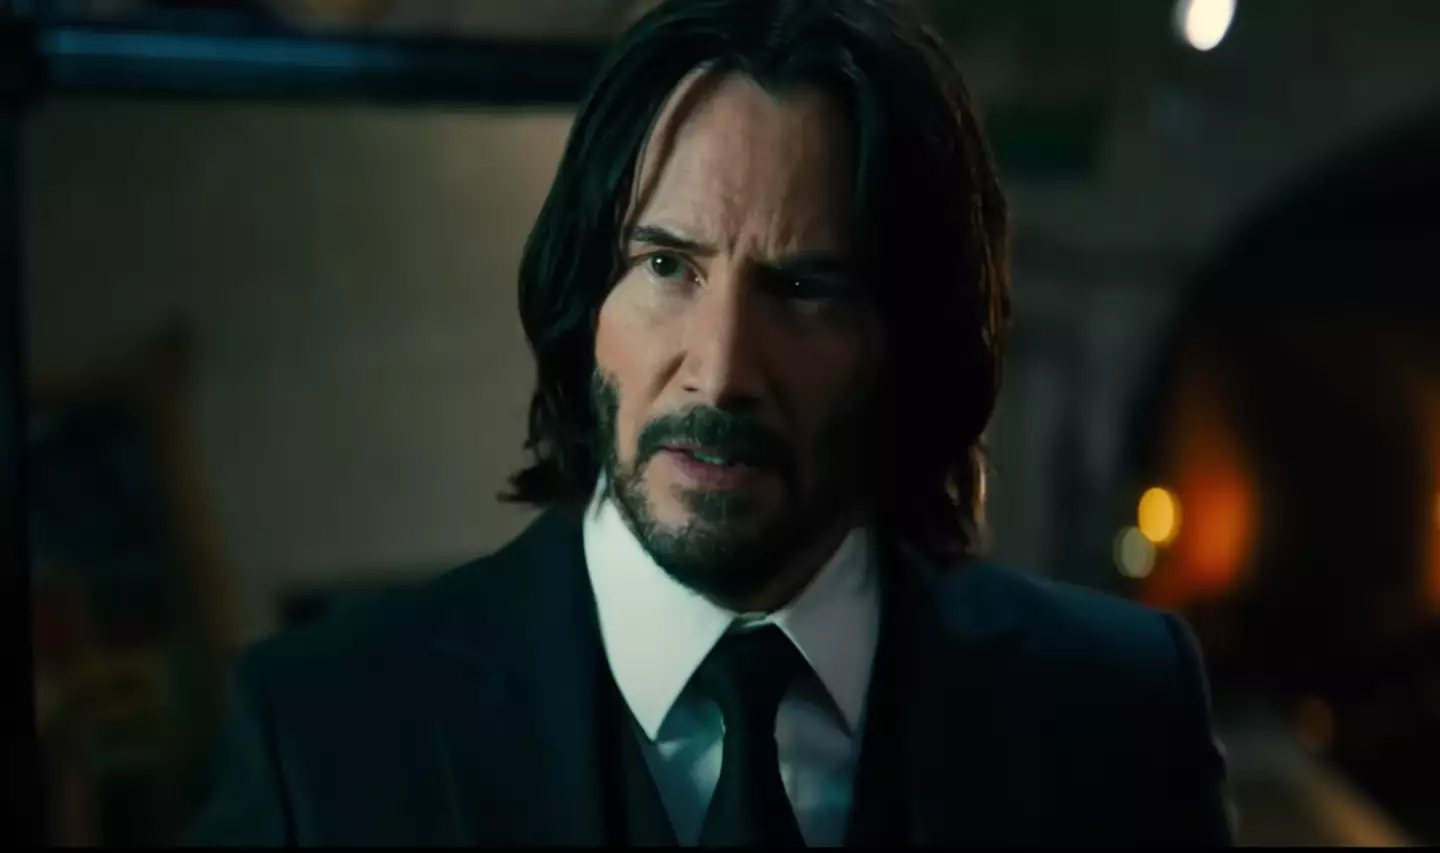 Keanu Reeves would be perfect, surely?